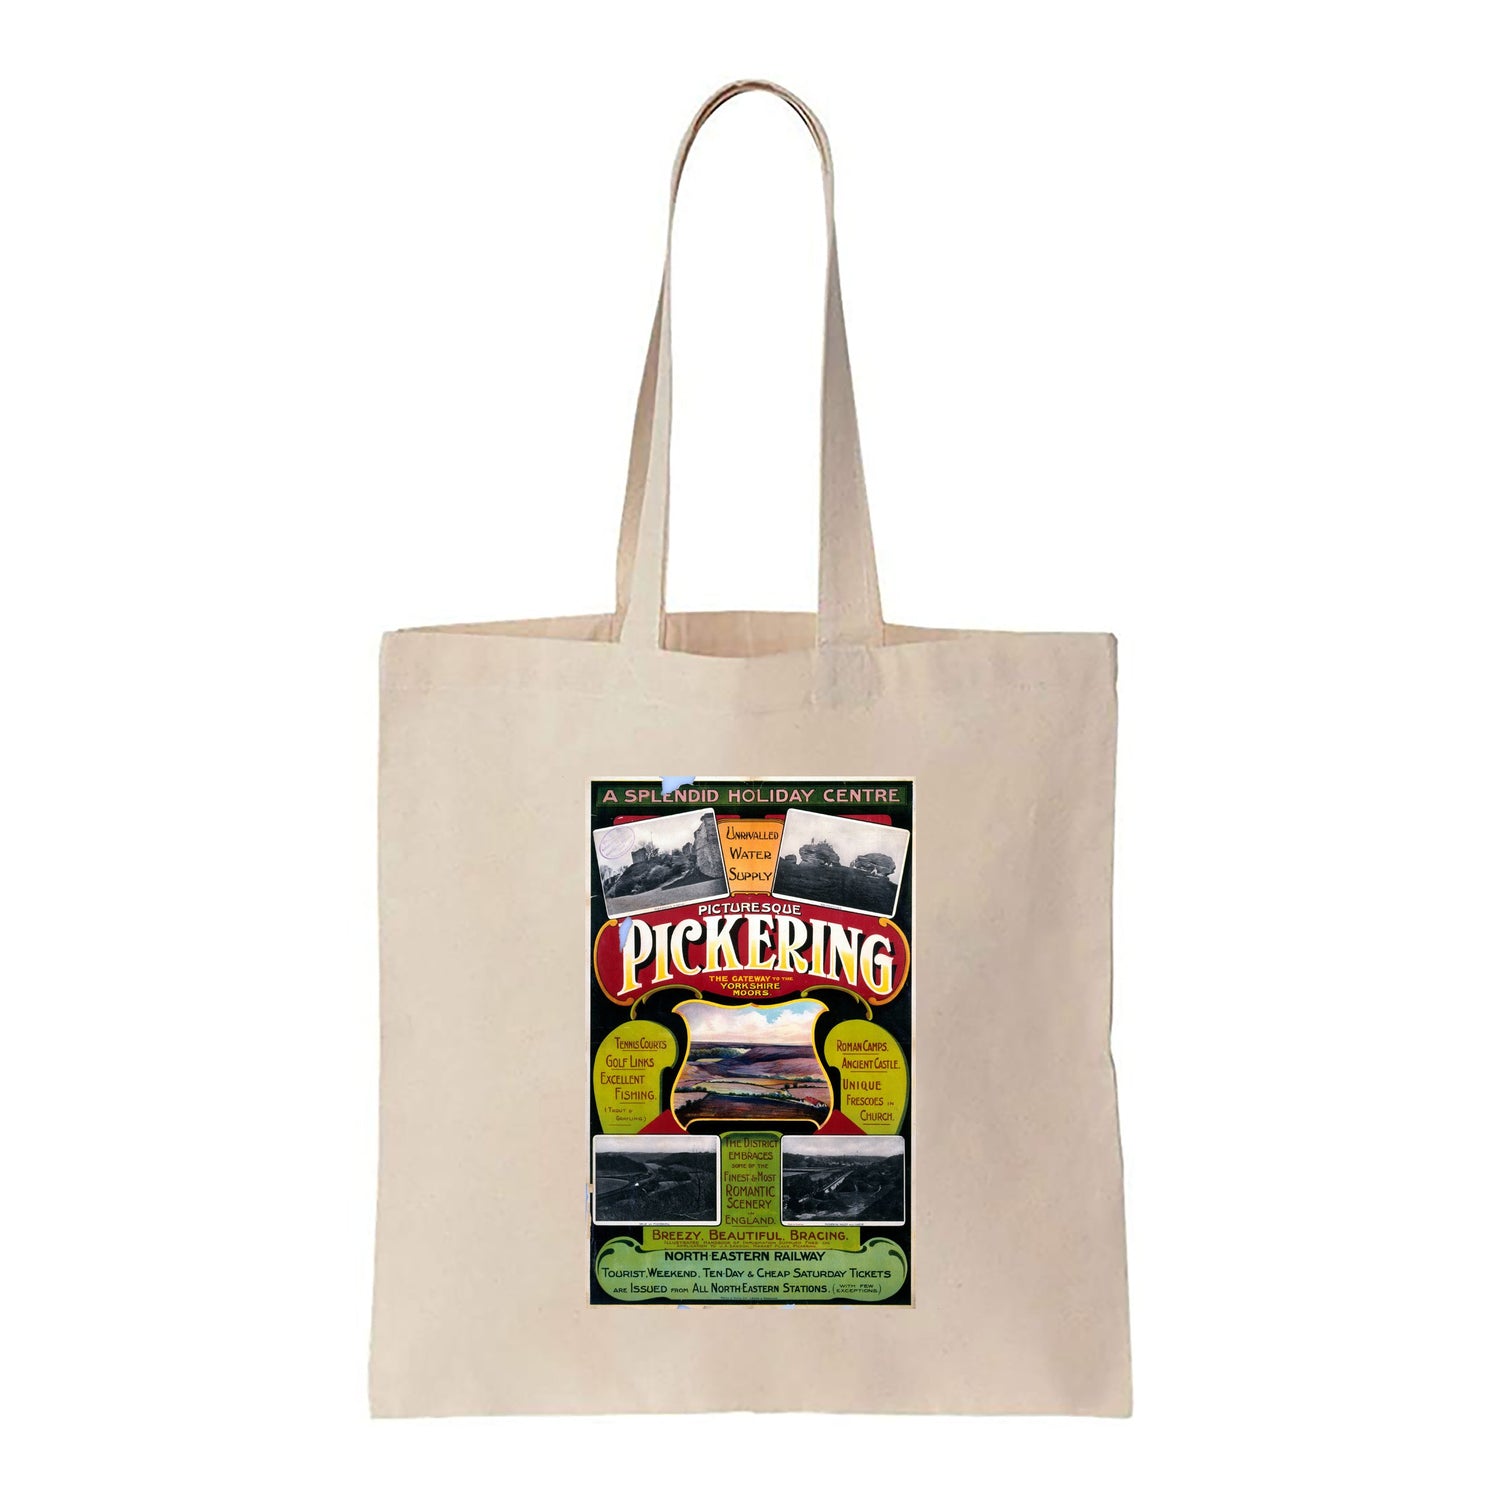 Picturesque Pickering - Yorkshire Moors - Canvas Tote Bag